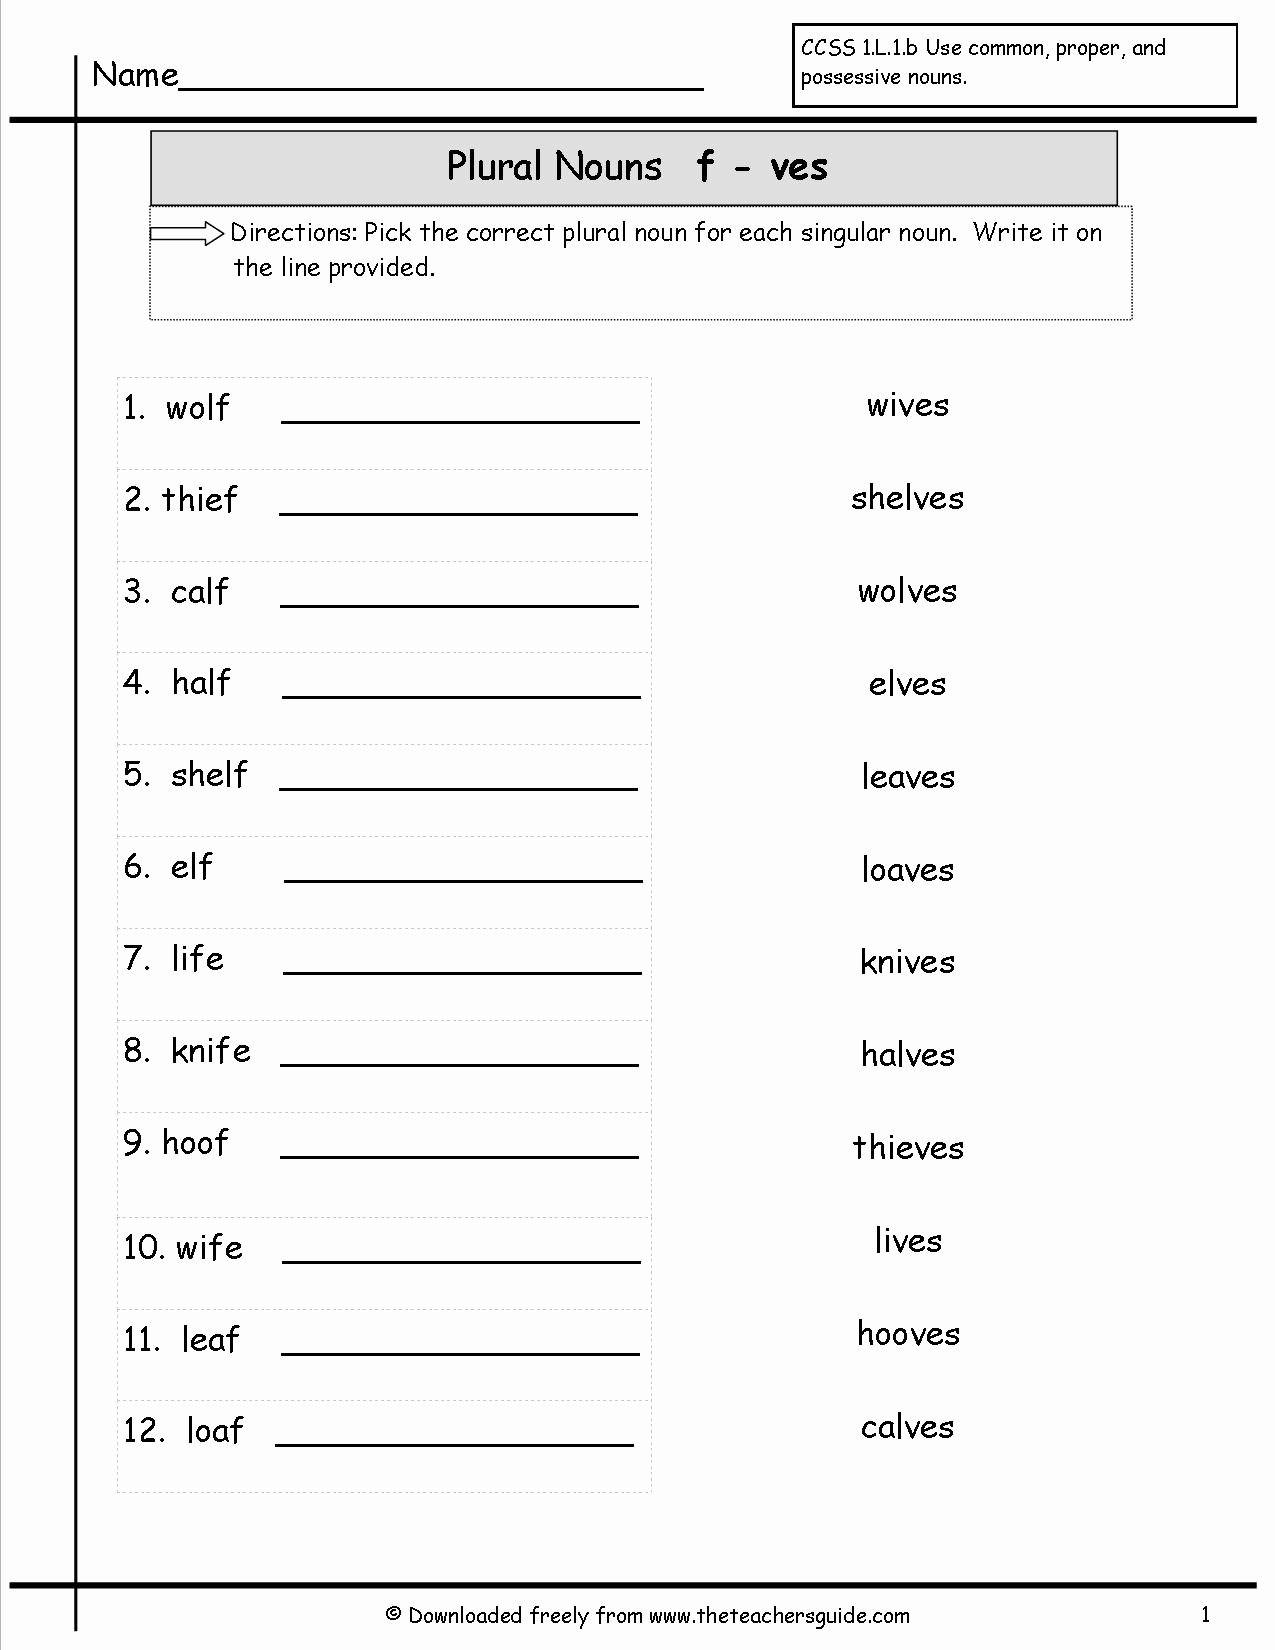 Singular and Plural Nouns Worksheet Luxury Singular and Plural Nouns Worksheets From the Teacher S Guide